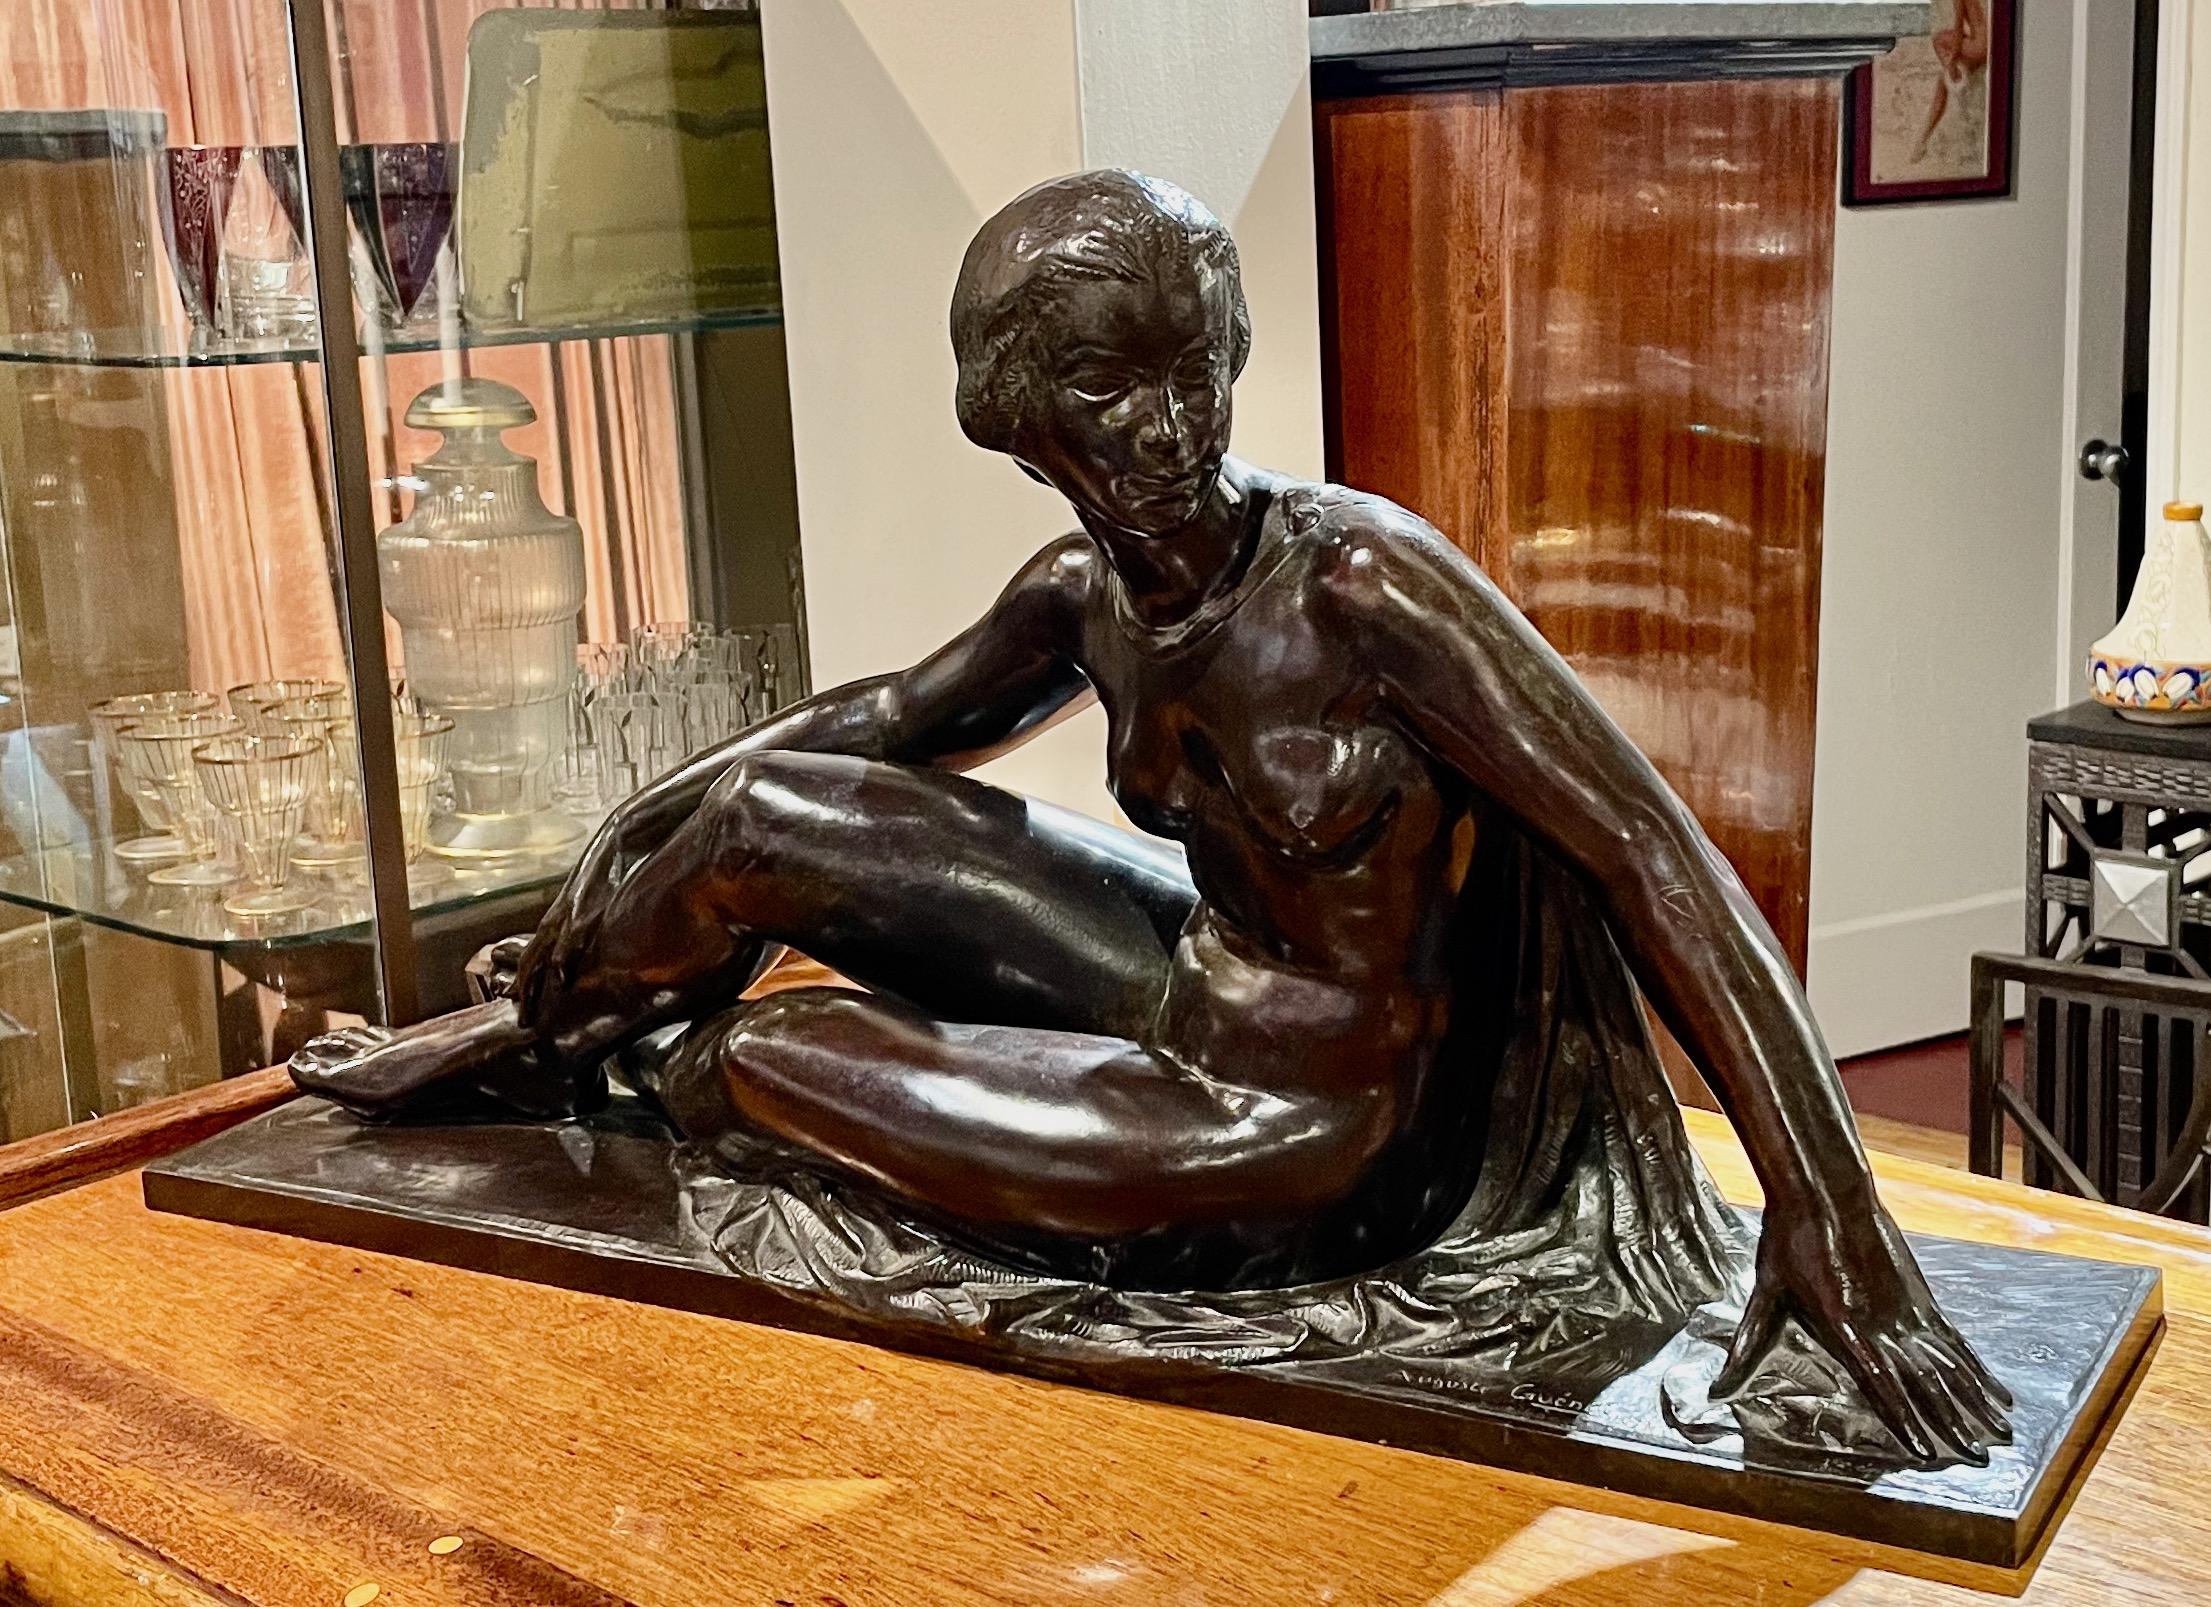 Early 20th Century Auguste Guénot, French Art Deco Sculptor 1924 Female Model 1st Edition For Sale